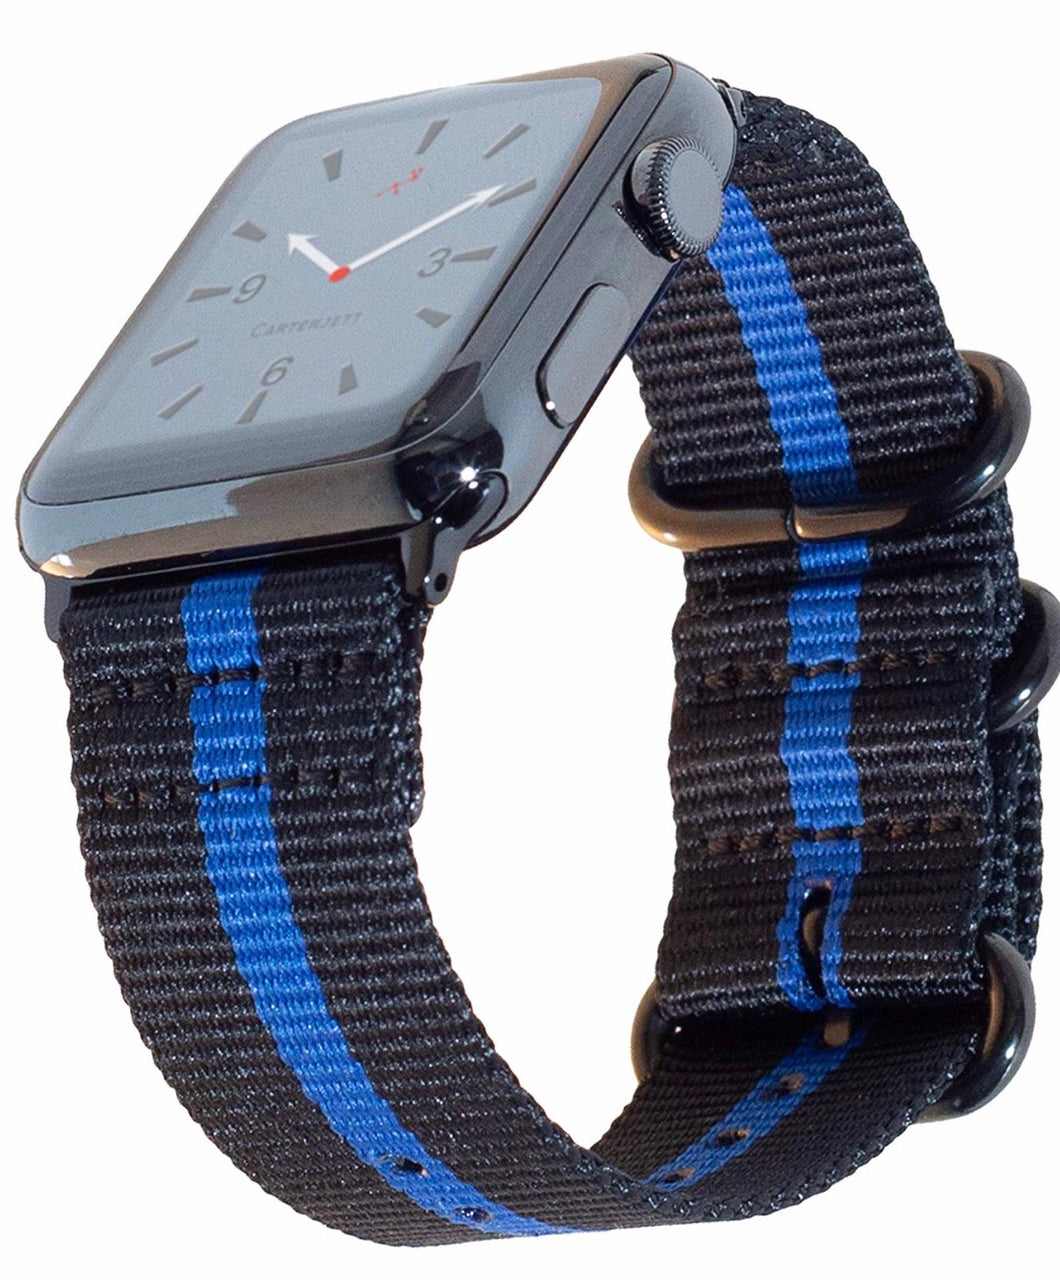 Thin Blue Line Nylon Compatible Apple Watch Band (2 sizes) by Carterjett